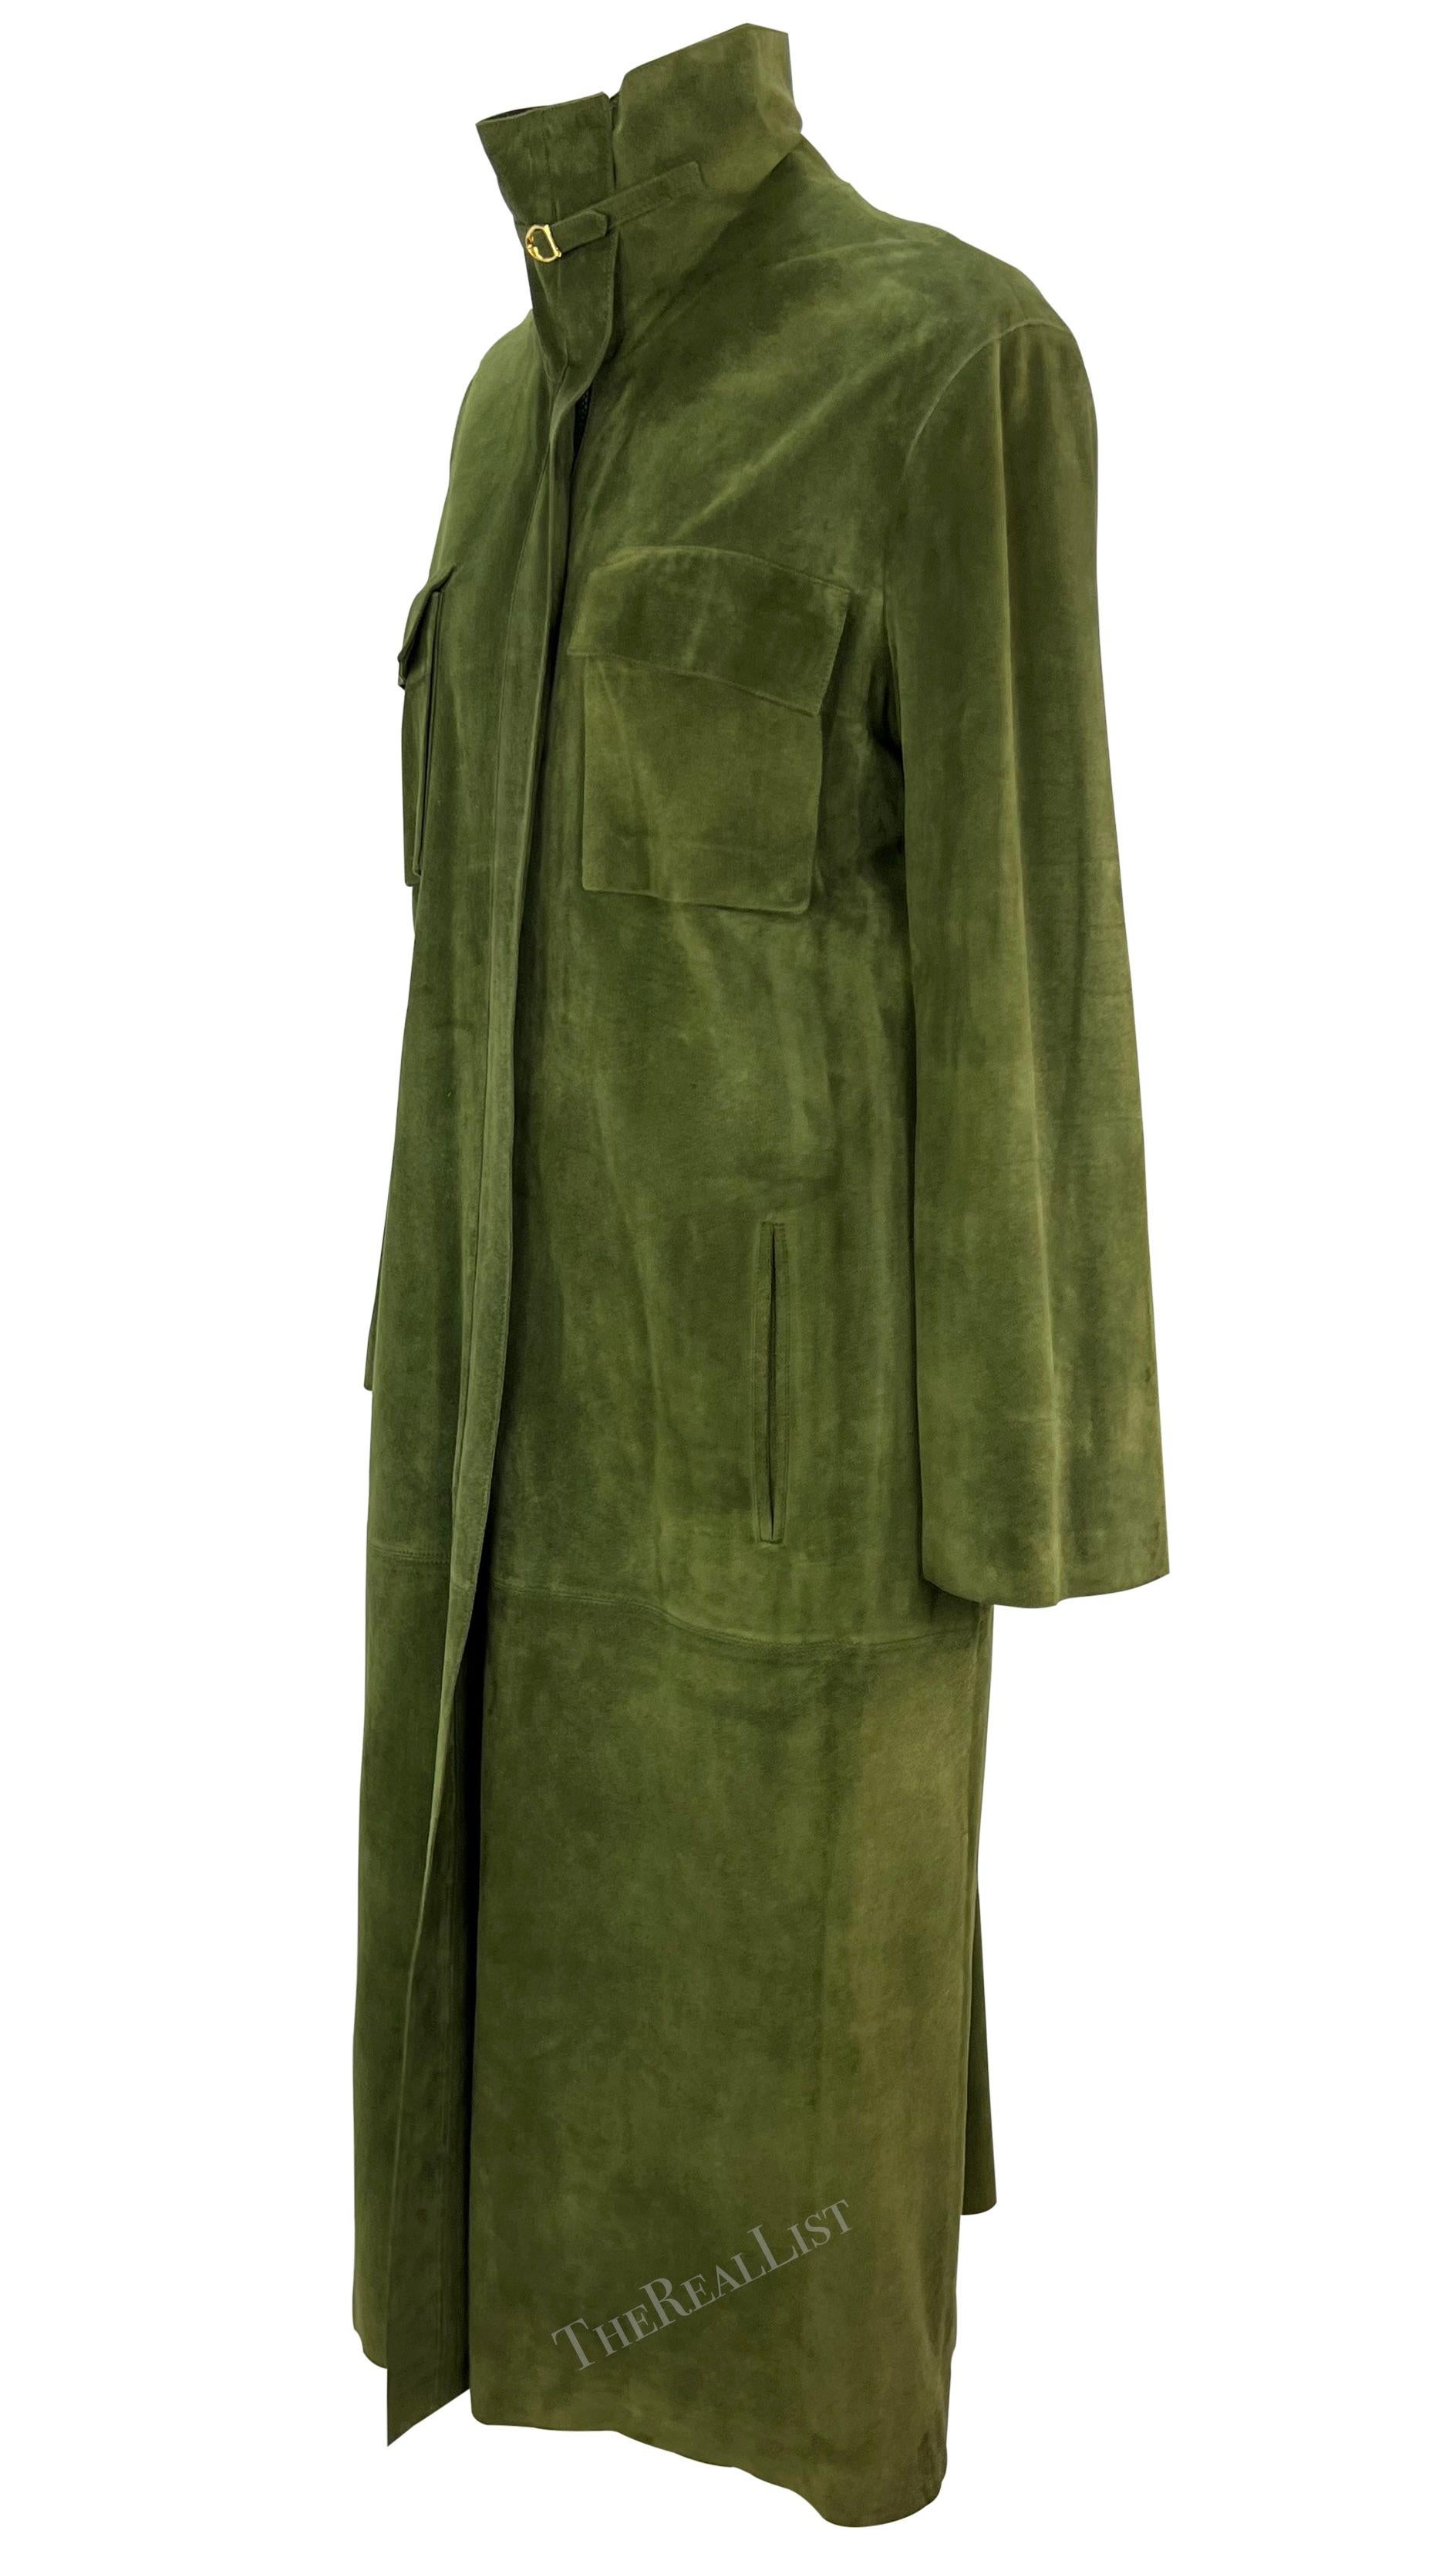 1970s Gucci Stirrup Buckle Green Suede Pocket Full-Length Oversized Trench Coat In Good Condition For Sale In West Hollywood, CA